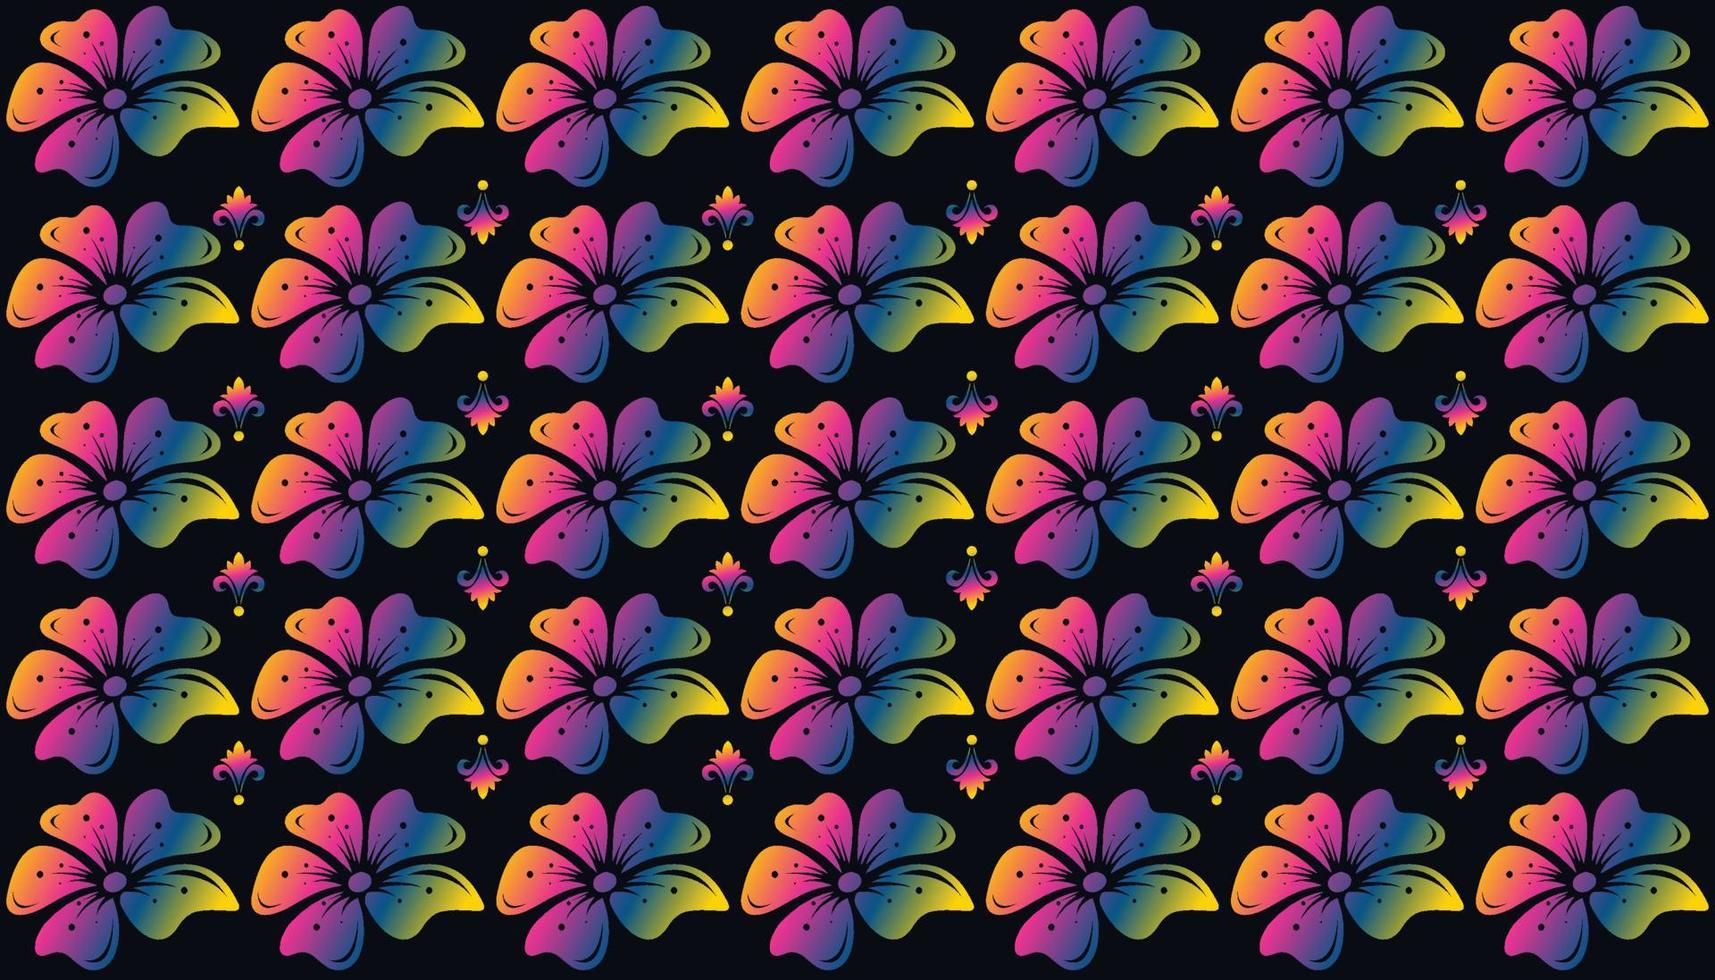 Painted flowers seamless vector background,repeating patterns,repeating patterns floral